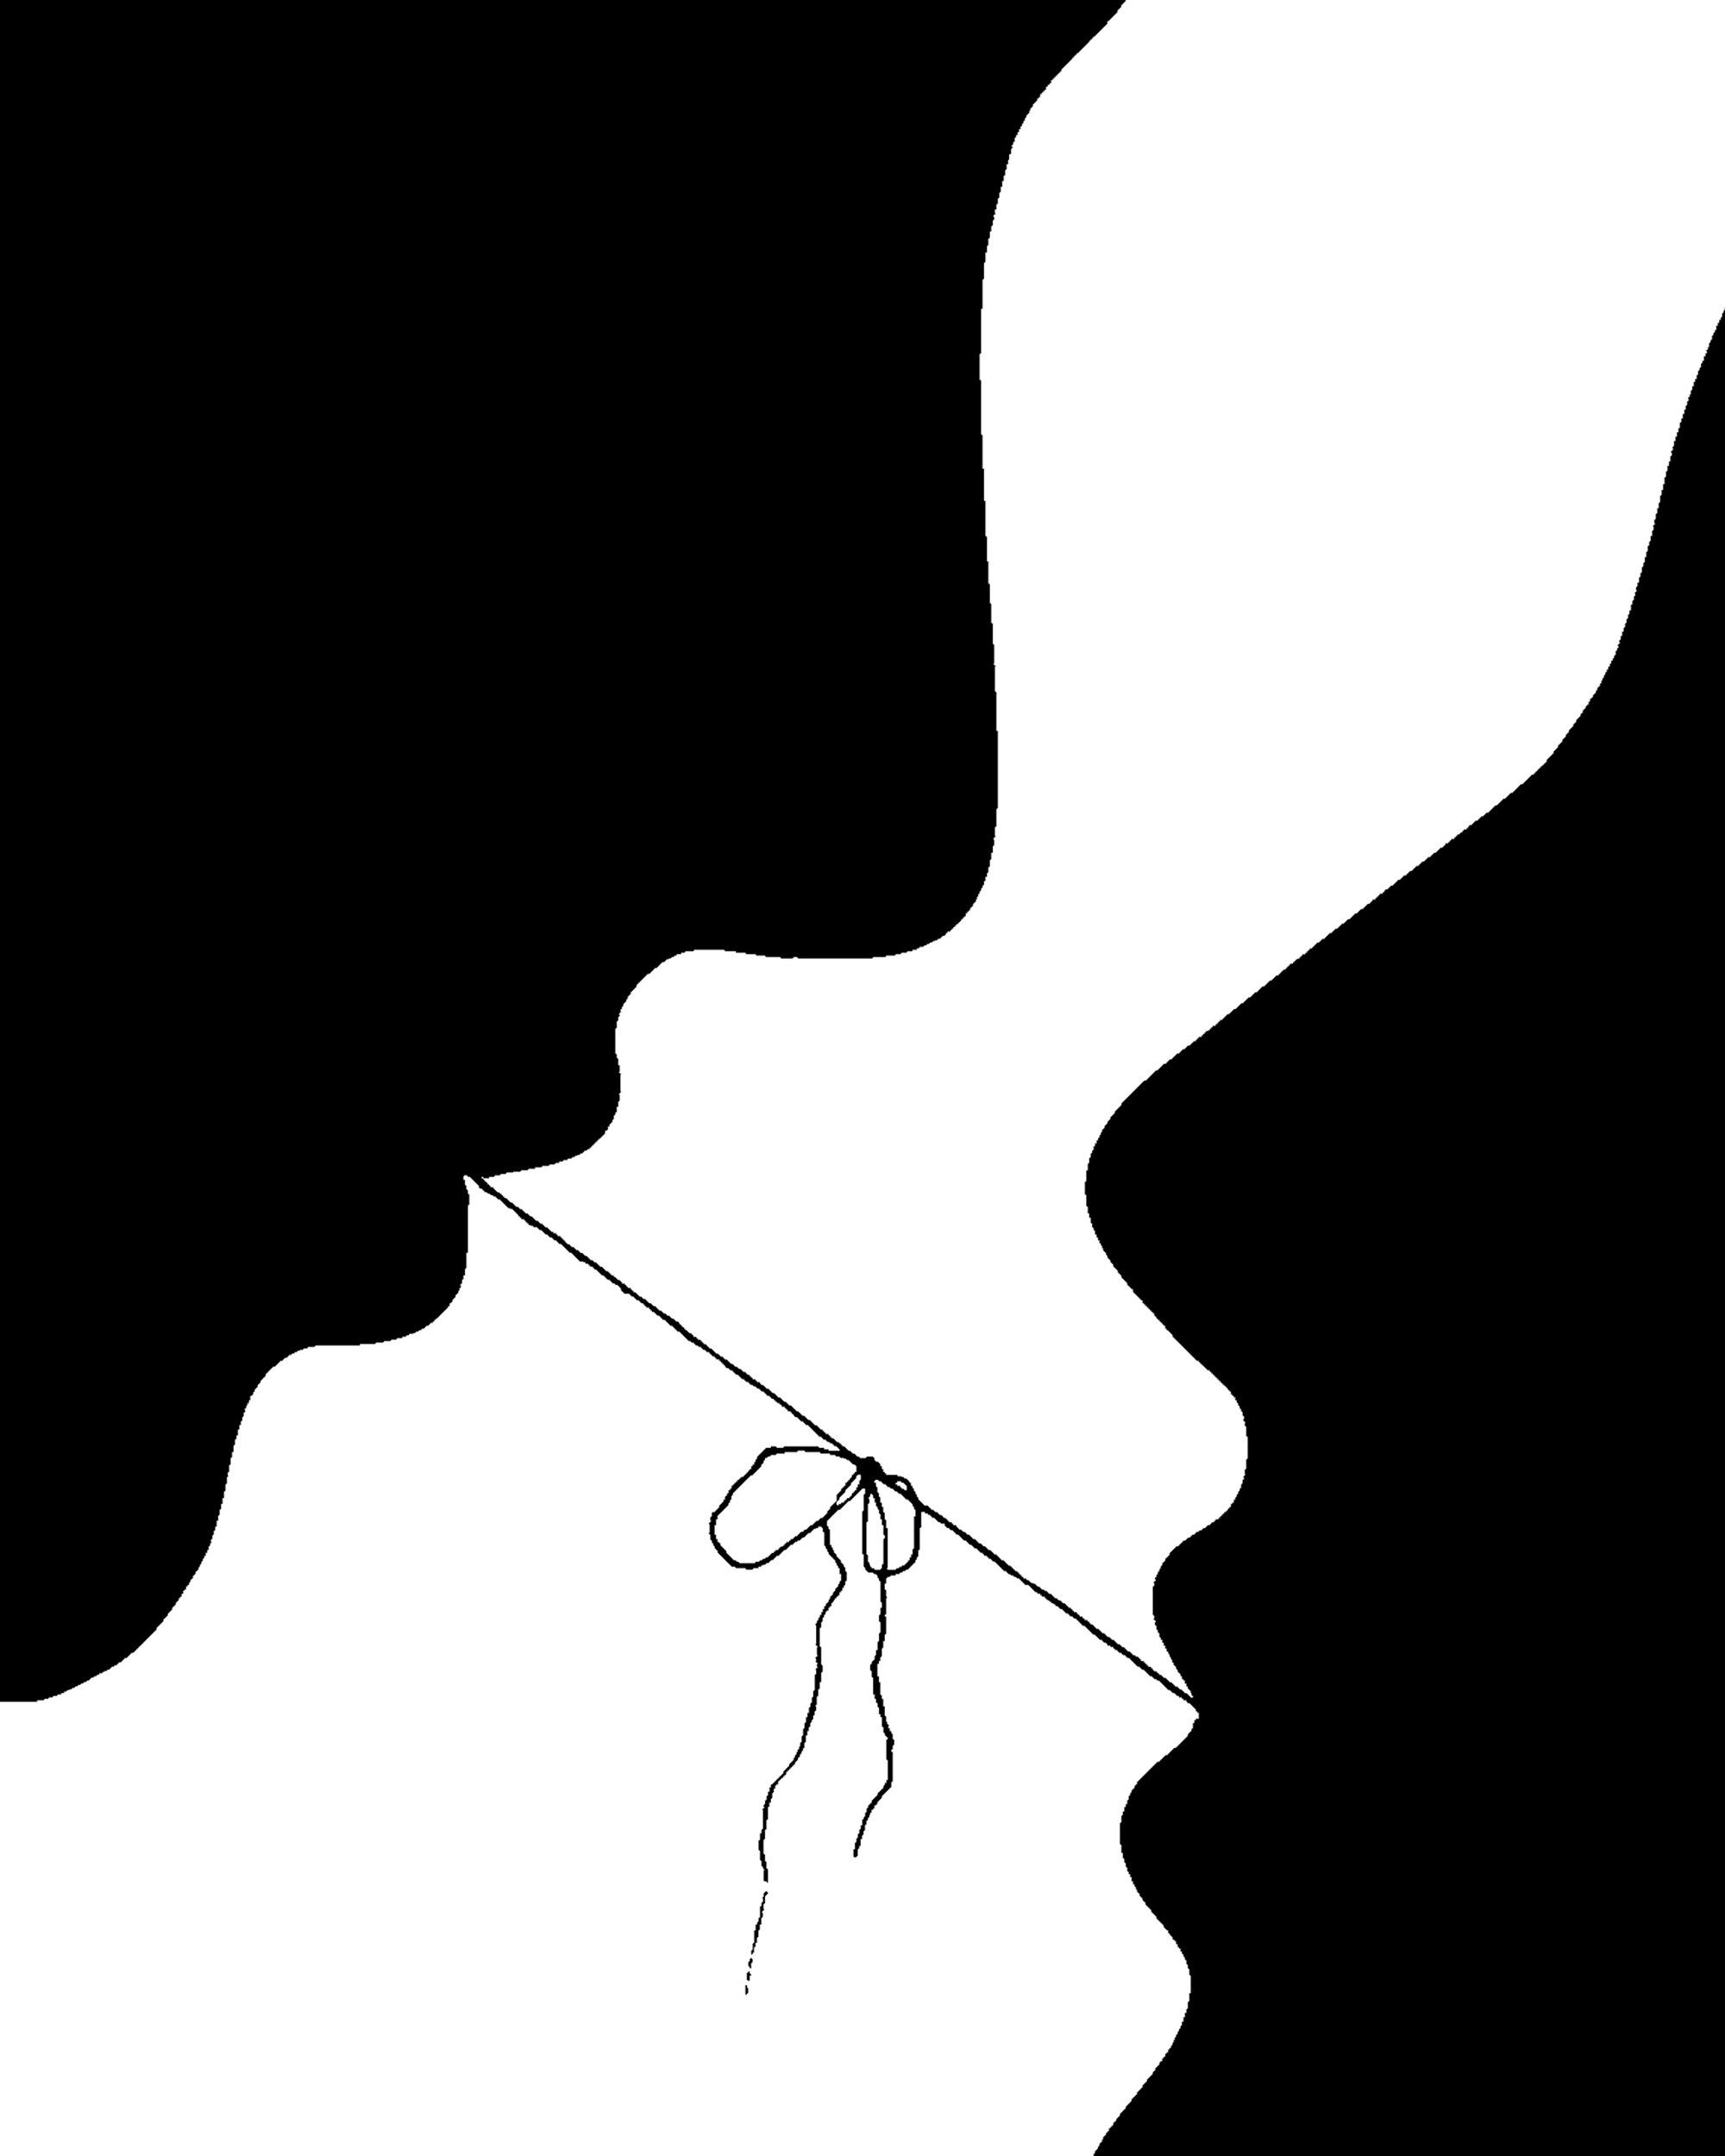 2004 untitled artwork by Ivan Ruzumov of two silhouettes tied together against a white background.